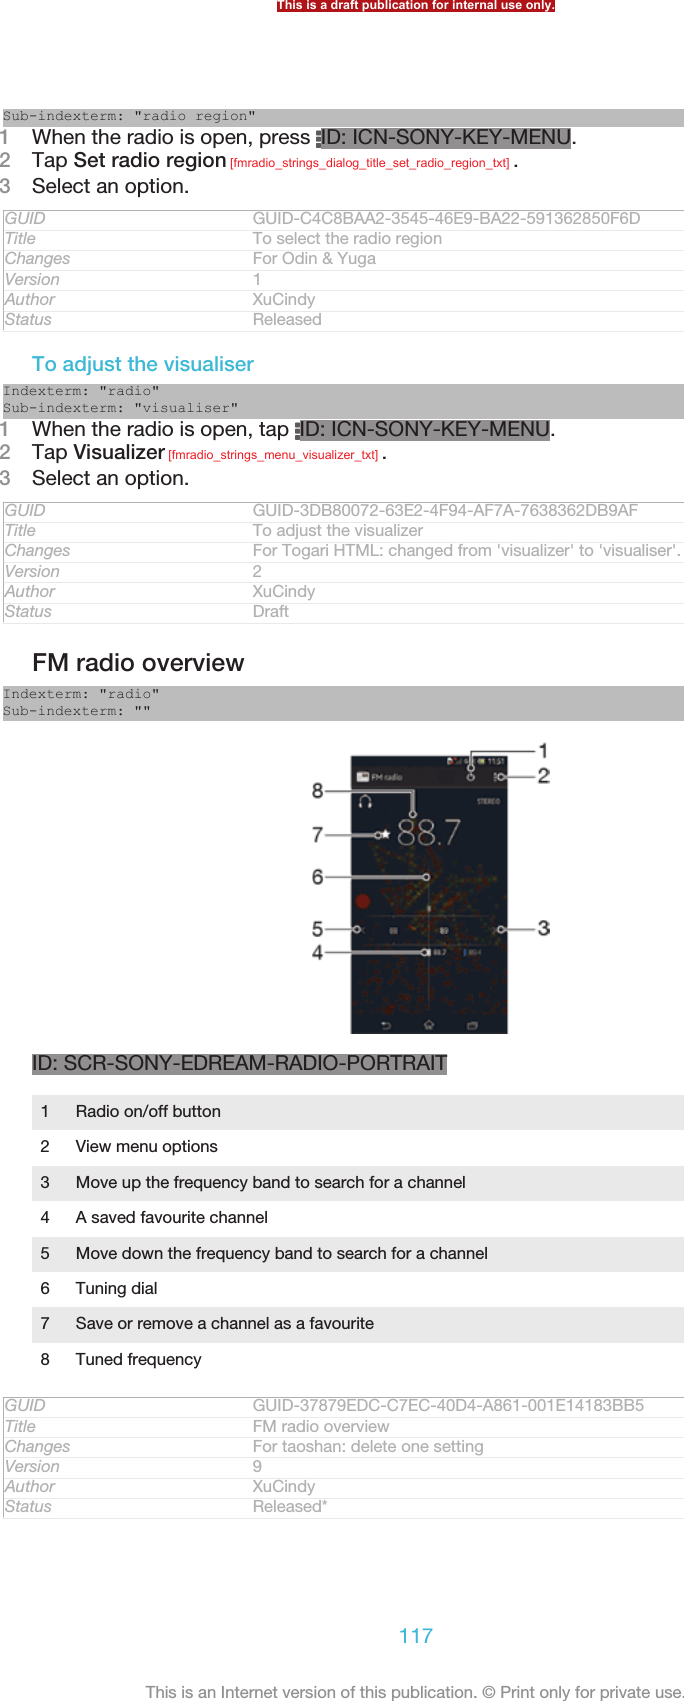 Sub-indexterm: &quot;radio region&quot;1When the radio is open, press  ID: ICN-SONY-KEY-MENU.2Tap Set radio region [fmradio_strings_dialog_title_set_radio_region_txt] .3Select an option.GUID GUID-C4C8BAA2-3545-46E9-BA22-591362850F6DTitle To select the radio regionChanges For Odin &amp; YugaVersion 1Author XuCindyStatus ReleasedTo adjust the visualiserIndexterm: &quot;radio&quot;Sub-indexterm: &quot;visualiser&quot;1When the radio is open, tap  ID: ICN-SONY-KEY-MENU.2Tap Visualizer [fmradio_strings_menu_visualizer_txt] .3Select an option.GUID GUID-3DB80072-63E2-4F94-AF7A-7638362DB9AFTitle To adjust the visualizerChanges For Togari HTML: changed from &apos;visualizer&apos; to &apos;visualiser&apos;.Version 2Author XuCindyStatus DraftFM radio overviewIndexterm: &quot;radio&quot;Sub-indexterm: &quot;&quot;ID: SCR-SONY-EDREAM-RADIO-PORTRAIT1Radio on/off button2 View menu options3 Move up the frequency band to search for a channel4 A saved favourite channel5 Move down the frequency band to search for a channel6 Tuning dial7 Save or remove a channel as a favourite8 Tuned frequencyGUID GUID-37879EDC-C7EC-40D4-A861-001E14183BB5Title FM radio overviewChanges For taoshan: delete one settingVersion 9Author XuCindyStatus Released*This is a draft publication for internal use only.117This is an Internet version of this publication. © Print only for private use.